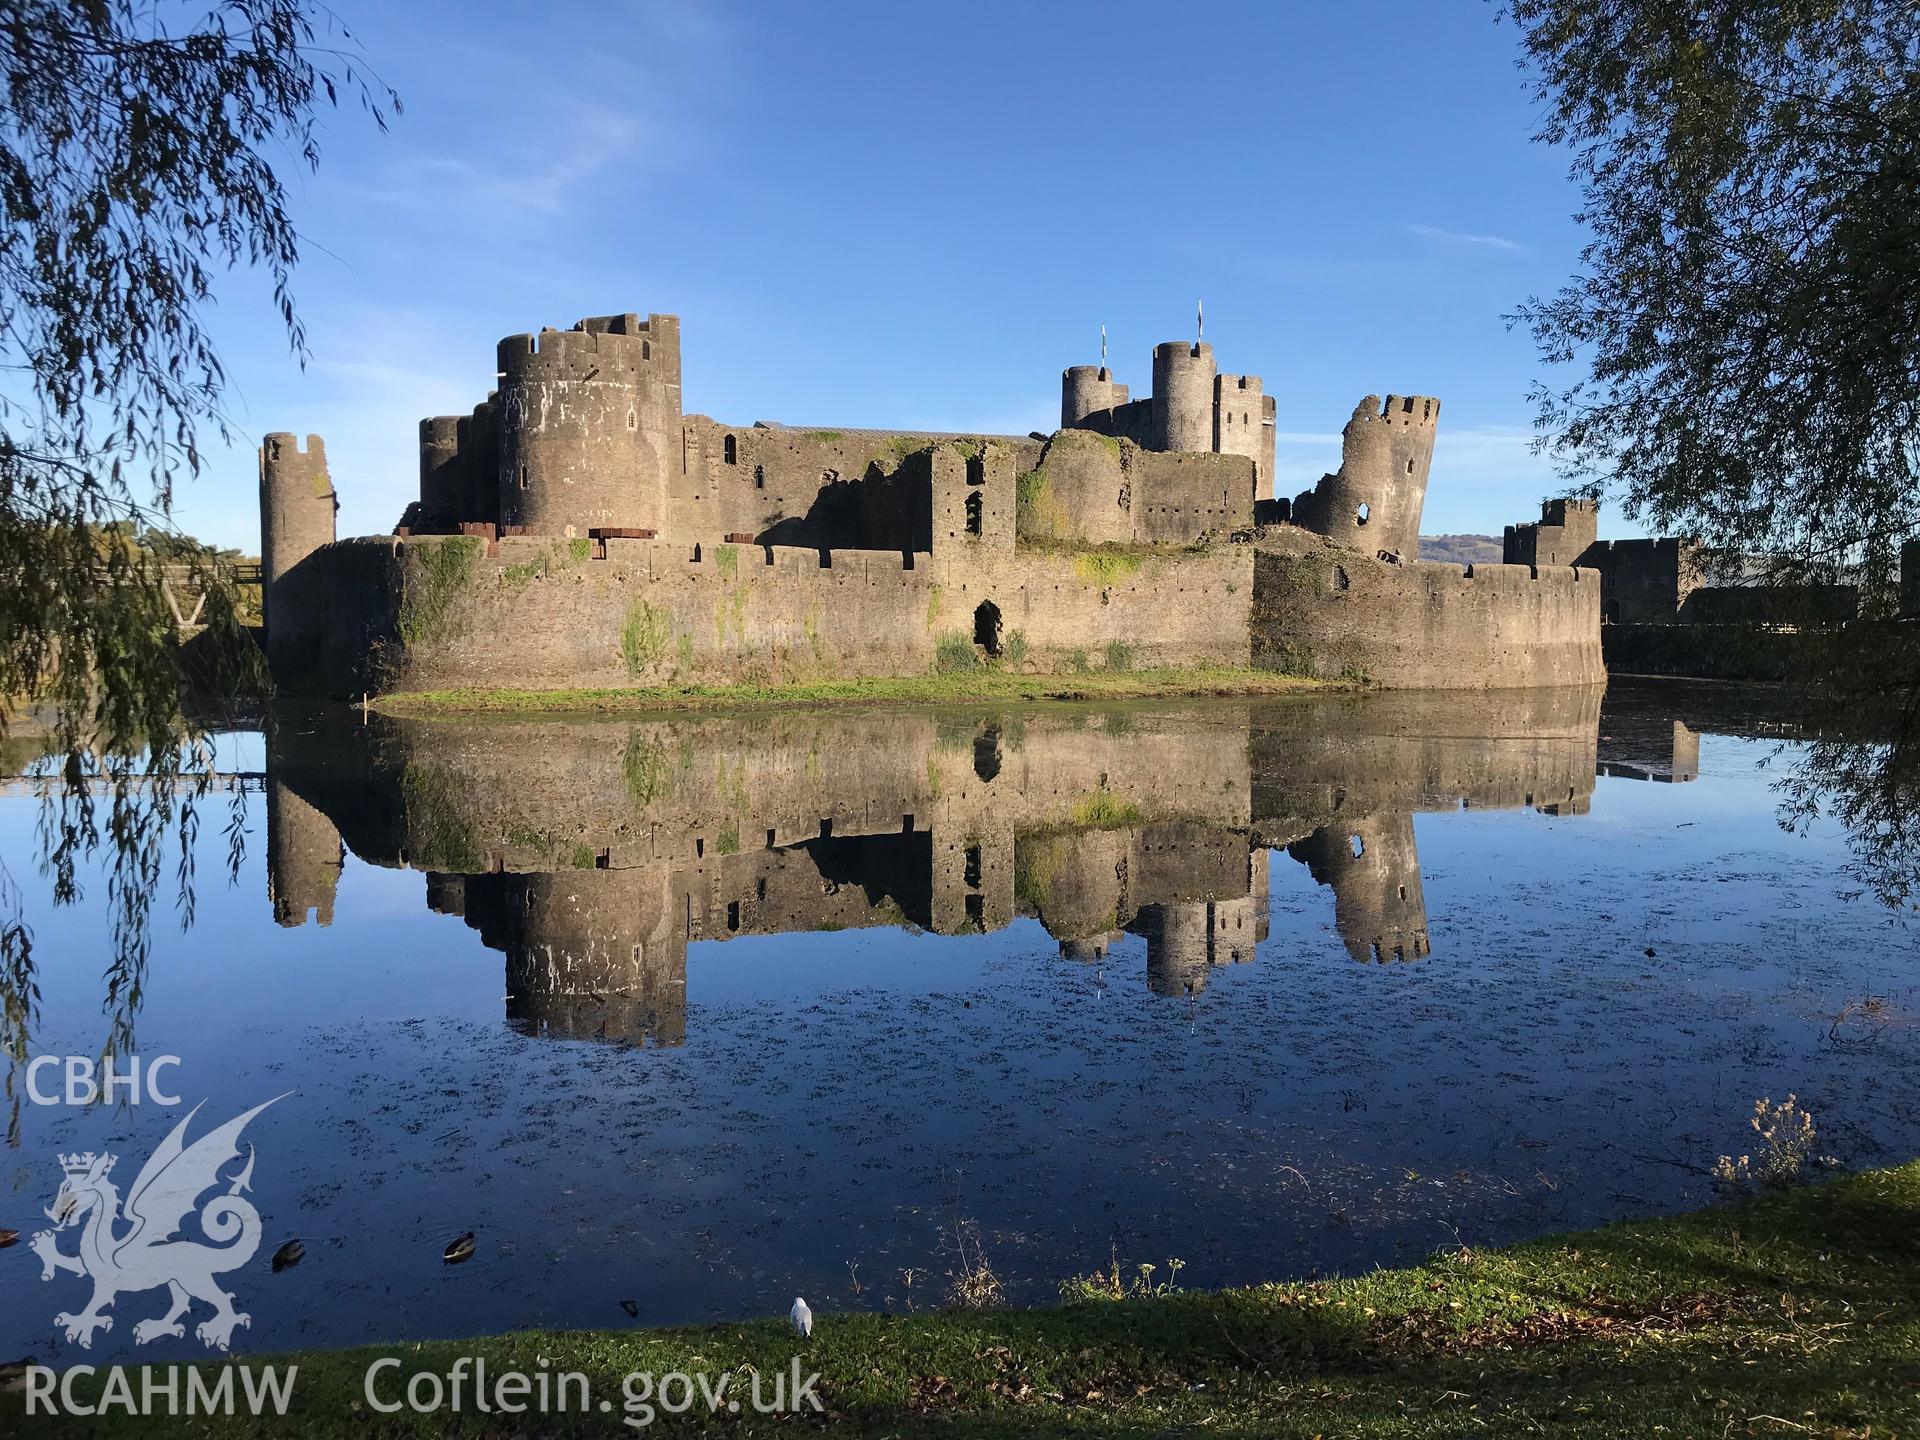 View of Caerphilly Castle and the surrounding moat. Colour photograph taken by Paul R. Davis on 2nd November 2018.